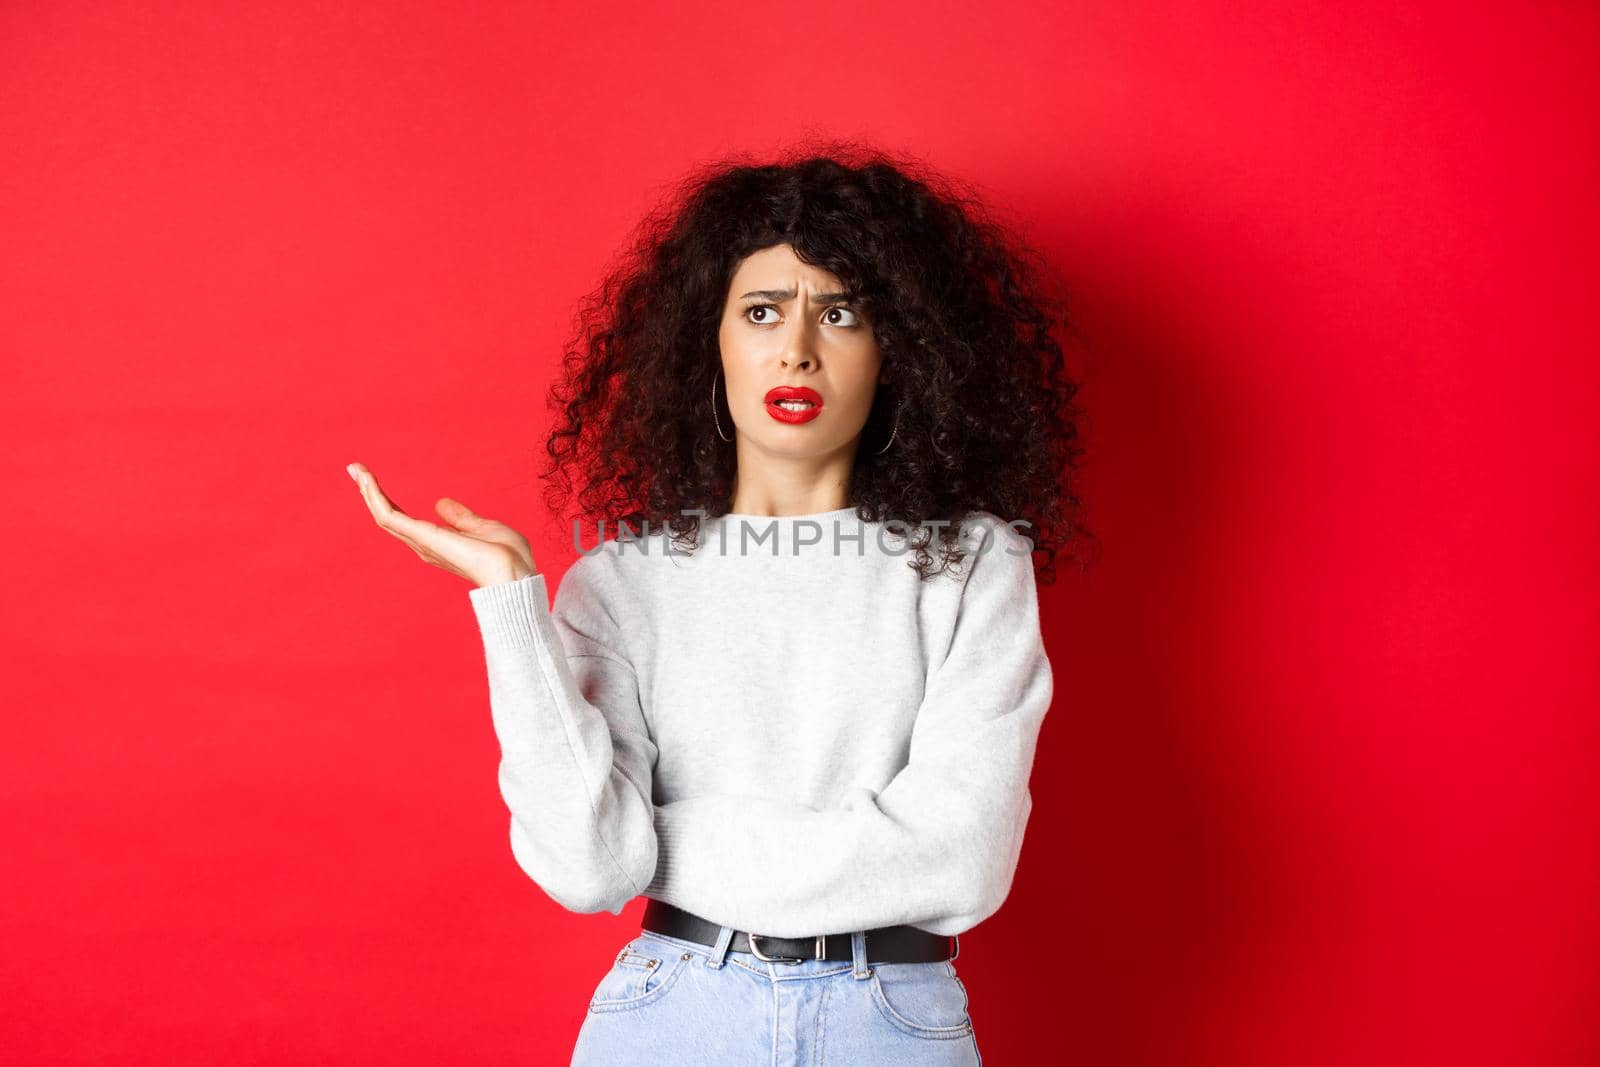 Annoyed and puzzled young woman with curly hair, raising hands up and looking aside, cant understand something strange, standing on red background.